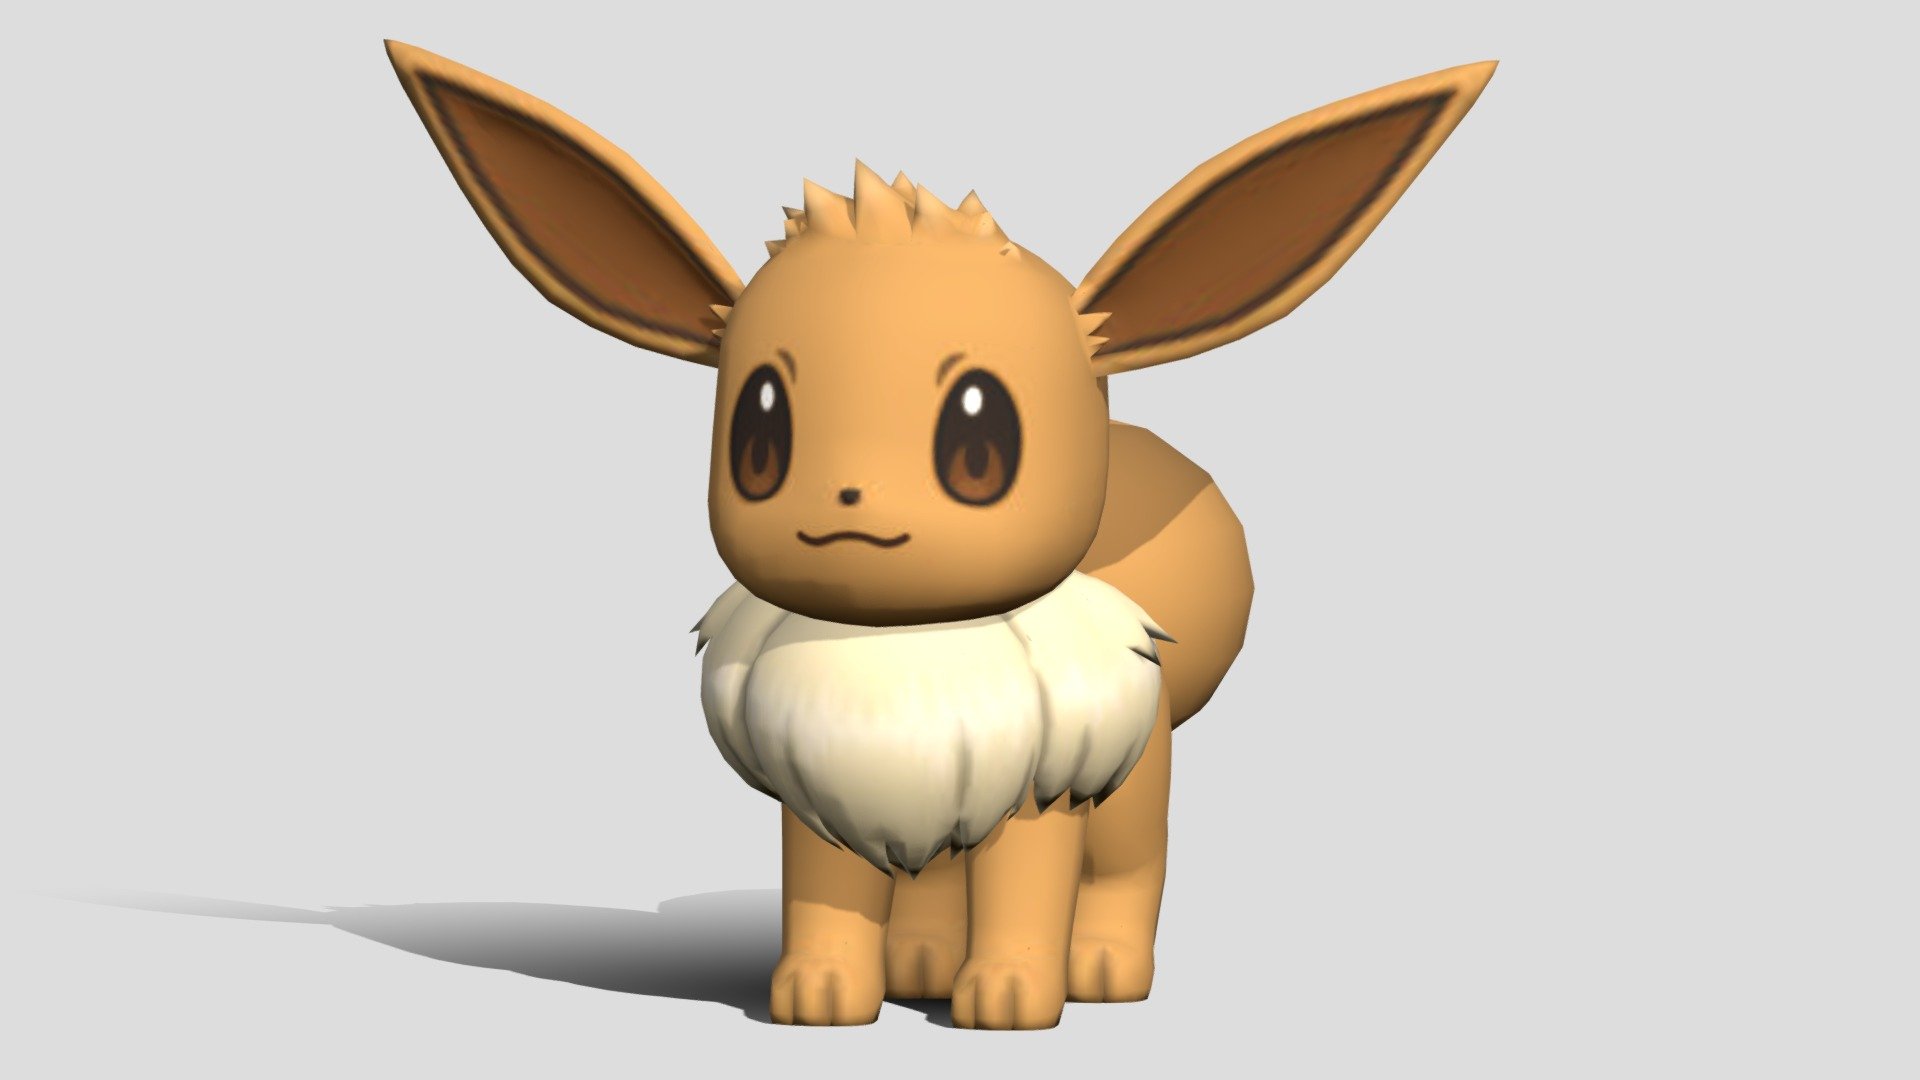 Eevee is a small, mammalian, quadrupedal Pokémon with primarily brown fur. The tip of its bushy tail and its large furry collar are cream-colored. It has short, slender legs with three small toes and a pink paw pad on each foot. Eevee has brown eyes, long pointed ears with dark brown interiors, and a small black nose.

In Pokémon: Let's Go, Eevee!, the player starts with a special Eevee known as the partner Eevee. The partner Eevee has purple eyes and a lighter shade of fur. These design elements were likely taken from the anime, which implemented similar traits starting in Pokémon the Series: Ruby and Sapphire. The partner Eevee has higher base stats and access to moves that normal Eevee do not. The marking on the tip of a female partner Eevee's tail is flower-shaped. Before Pokémon Sword and Shield, this trait was unique and wasn't found on other female Eevee 3d model